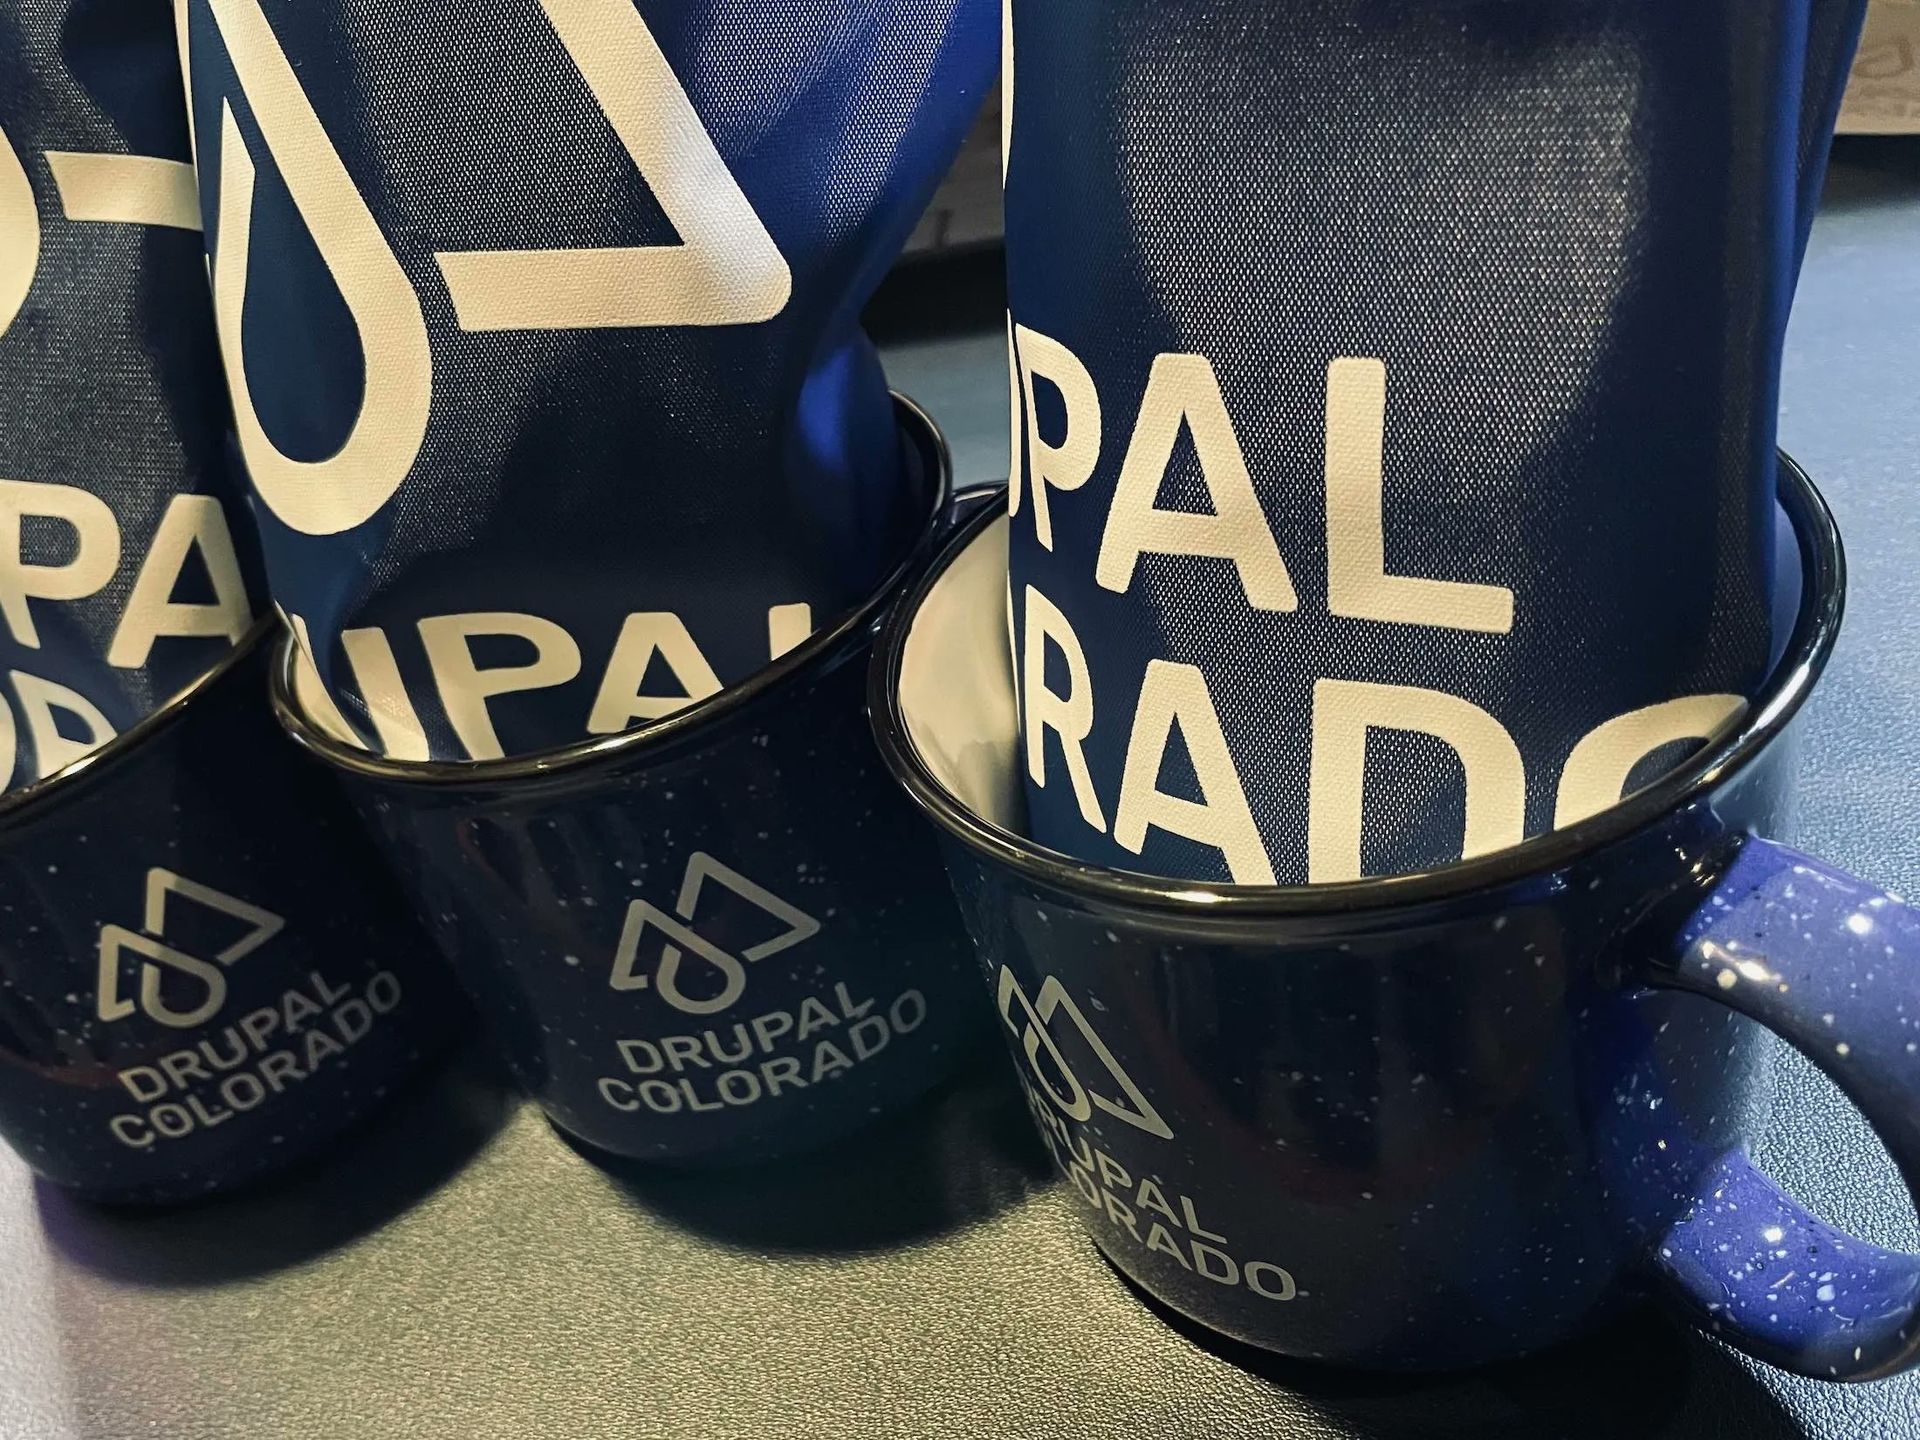 DrupalColorado Swag distributed among the delegates